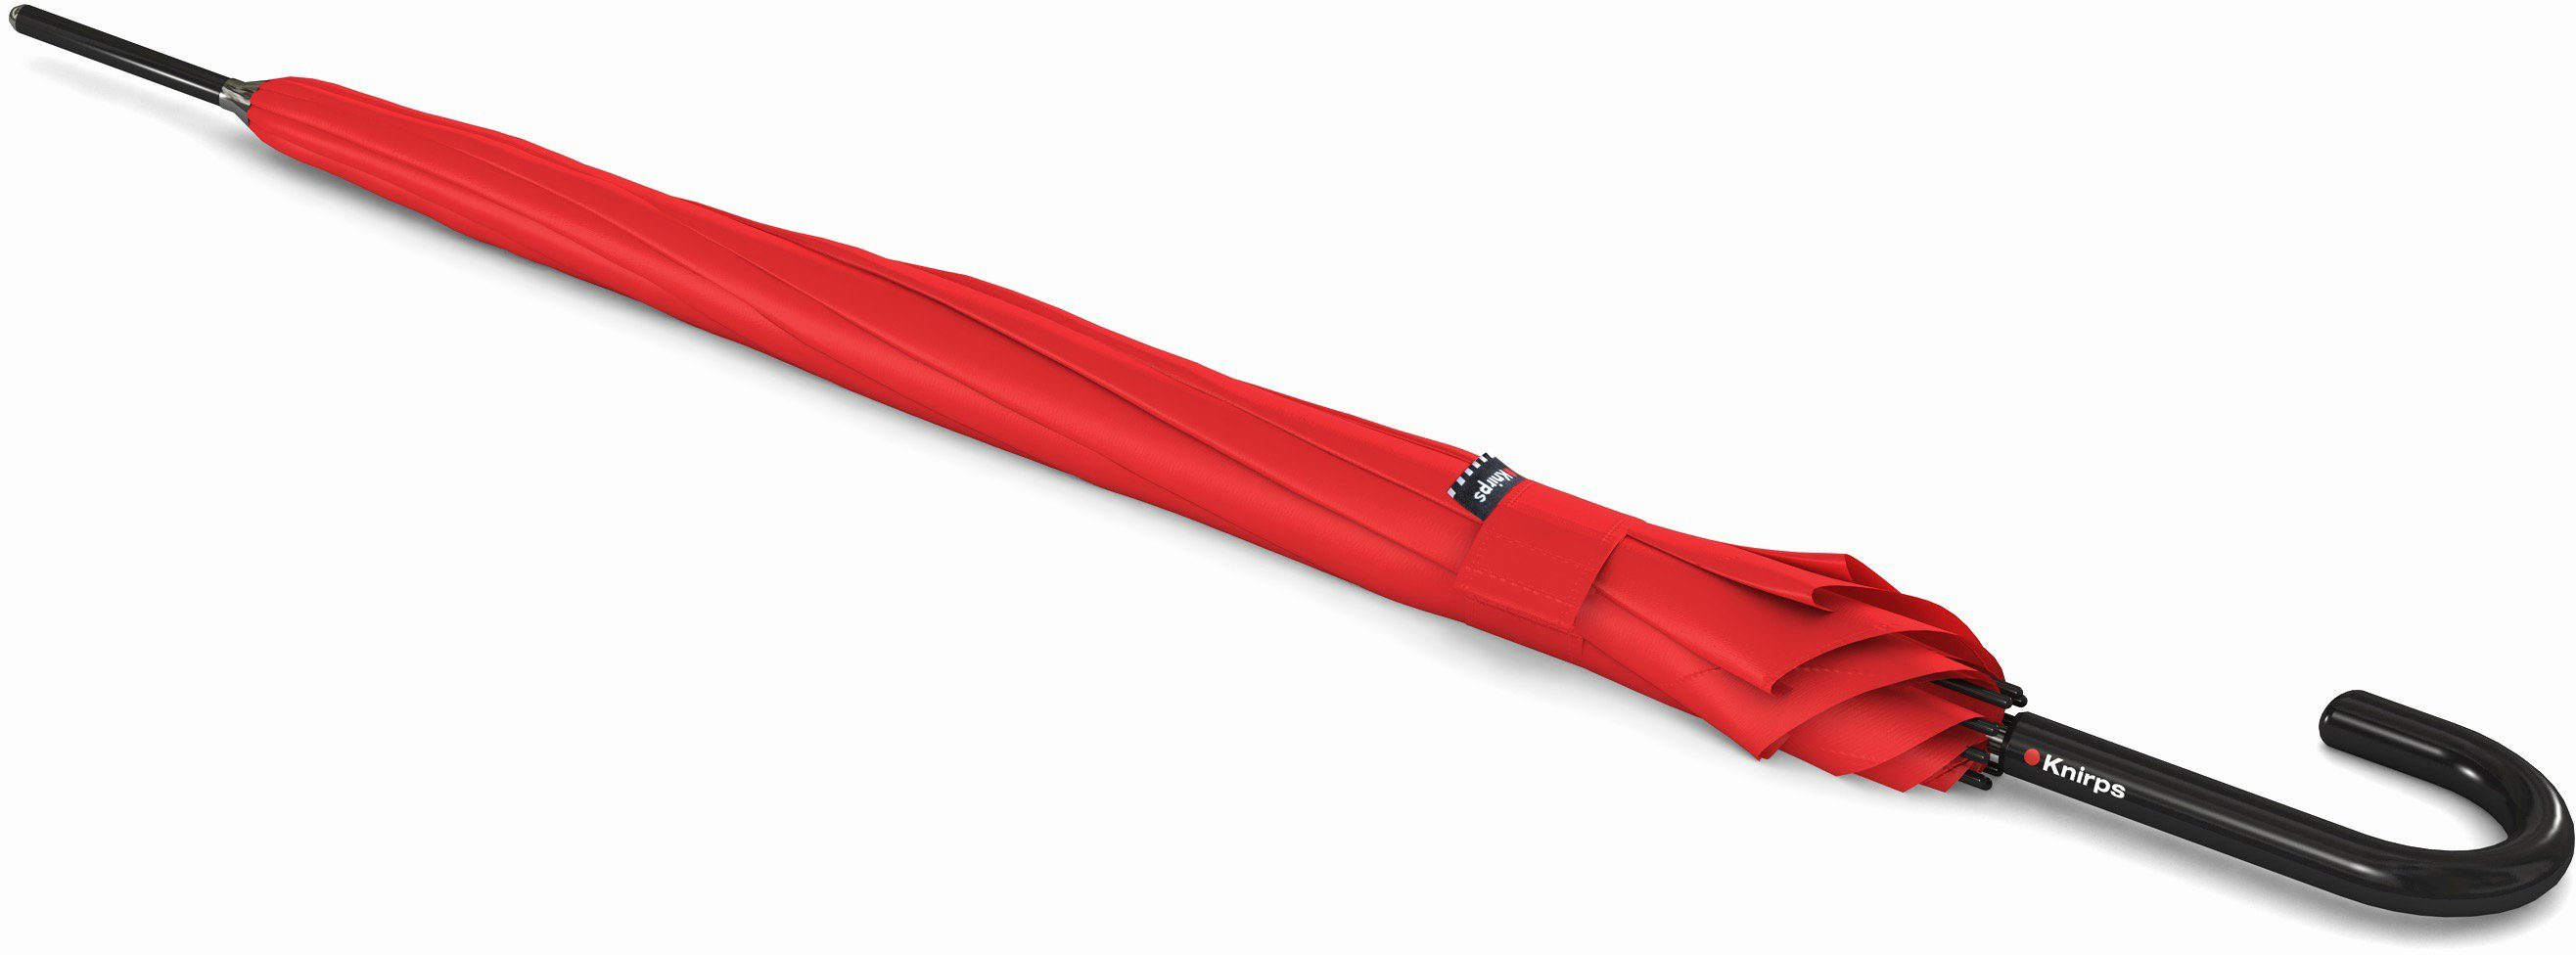 A.760 Stockregenschirm Stick Knirps® Red Automatic,